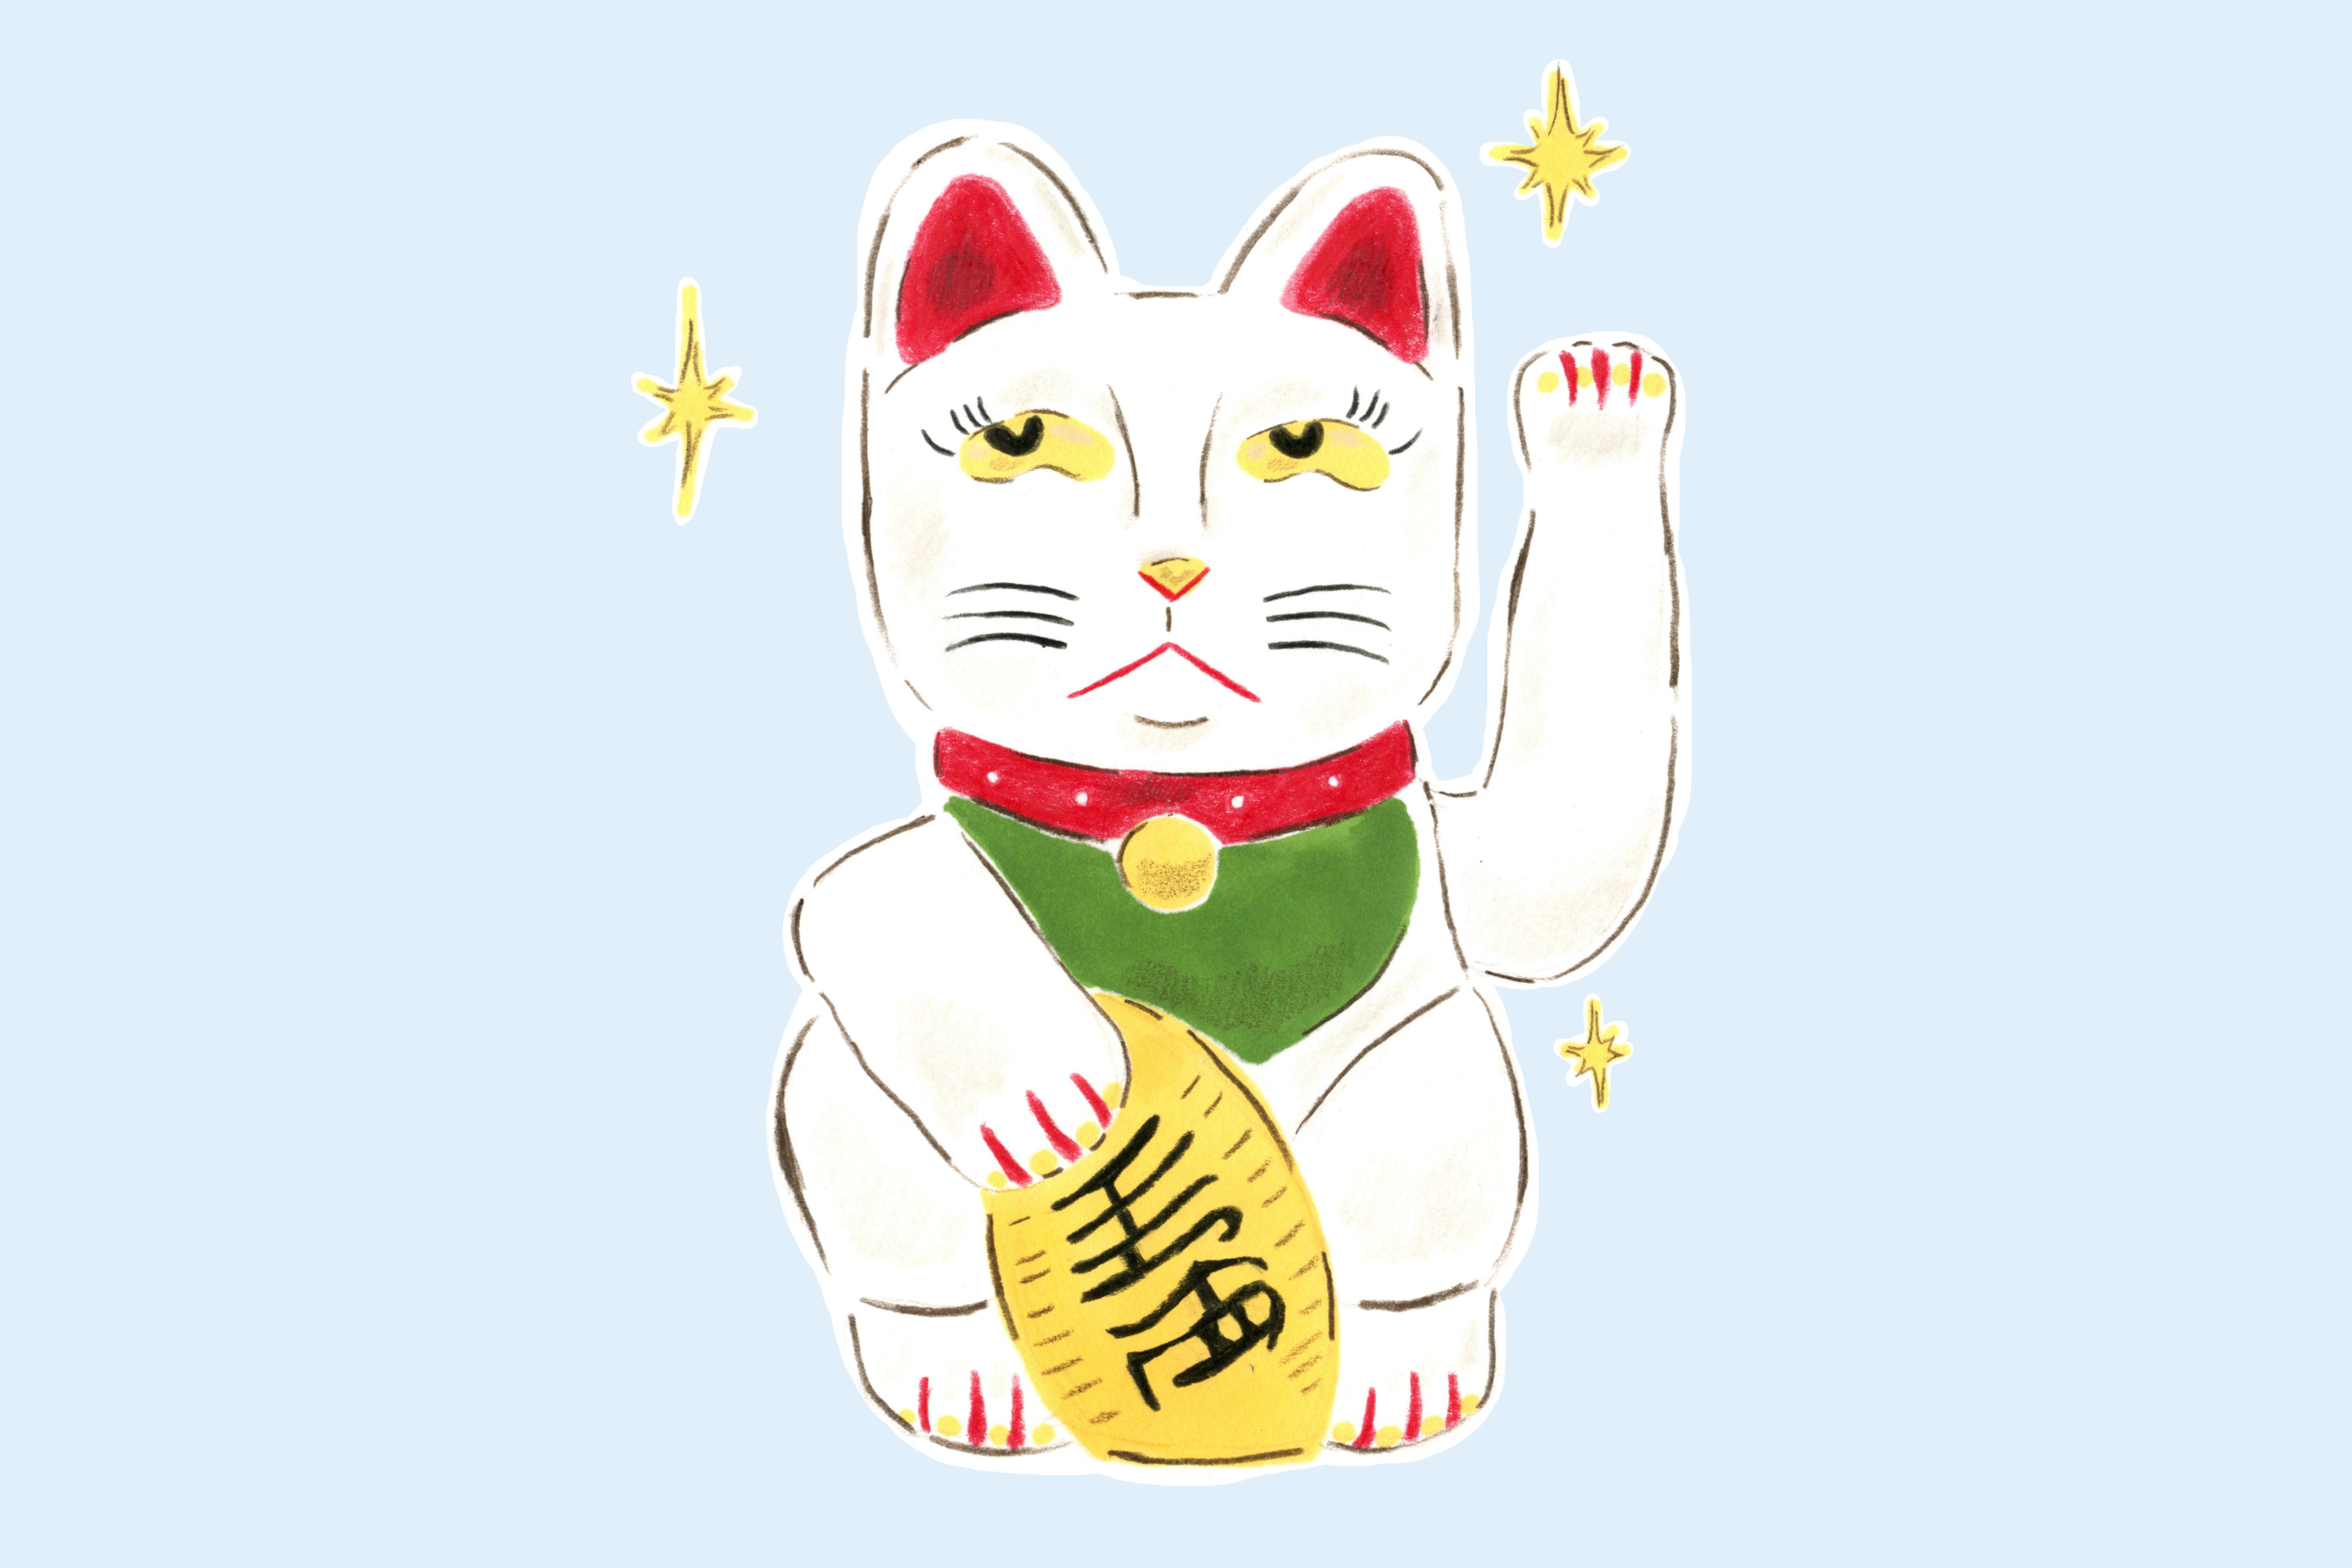 What Gordon Ramsay’s new restaurant Lucky Cat says about food appropriation in 2019